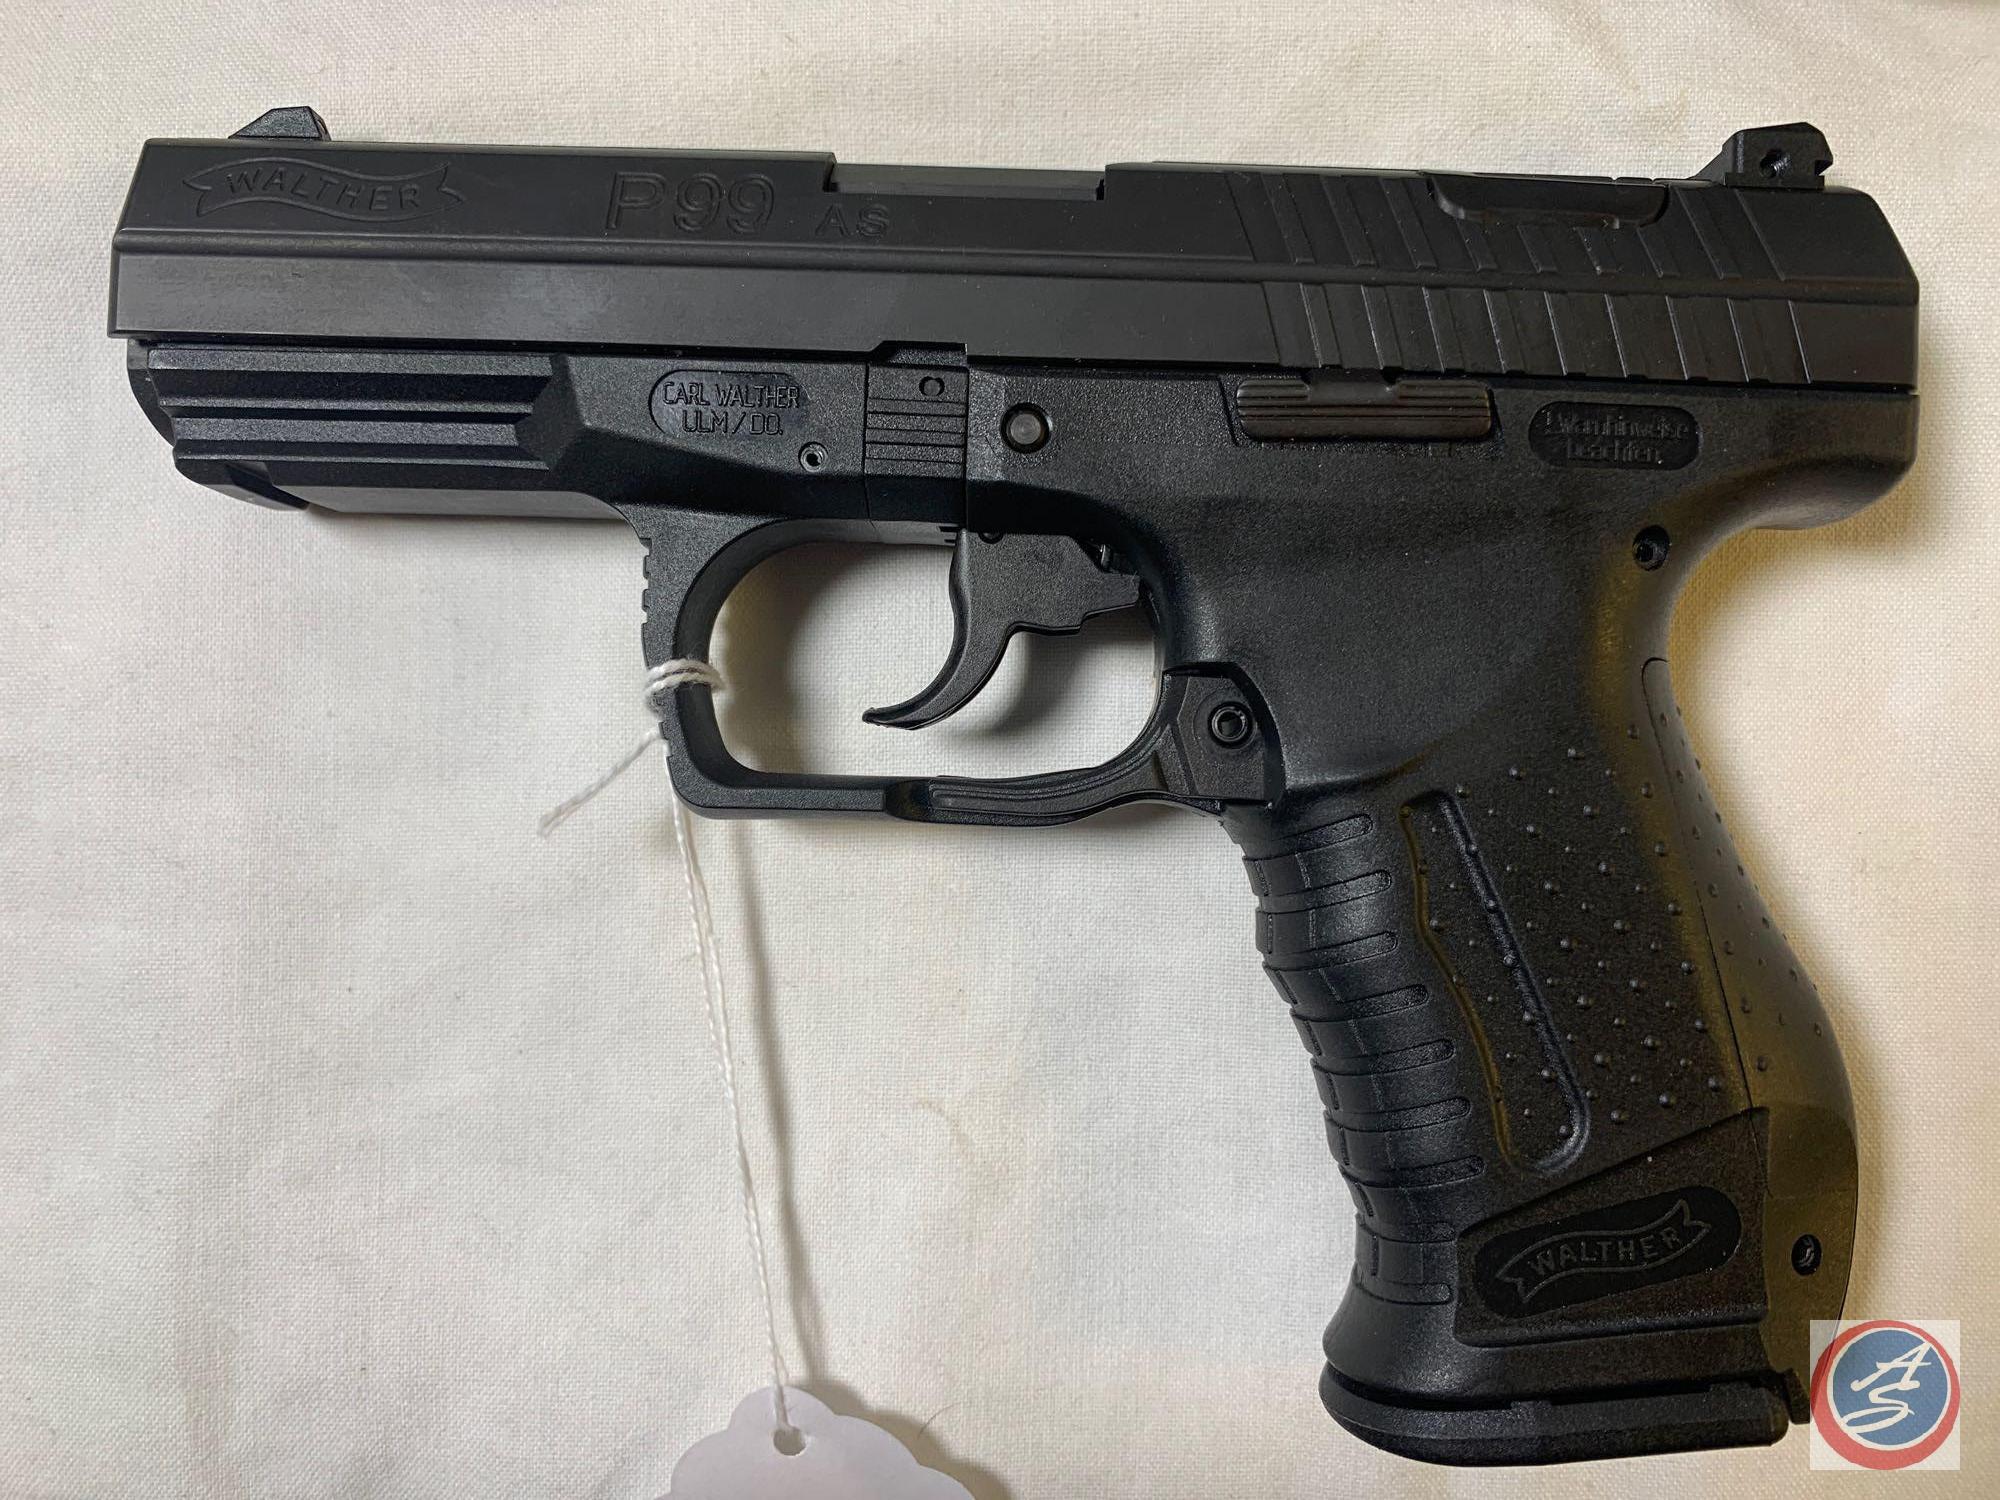 WALTHER Model P99 40 S&W Pistol Semi-Auto...Pistol as new in factory case with 2 magazines Ser #